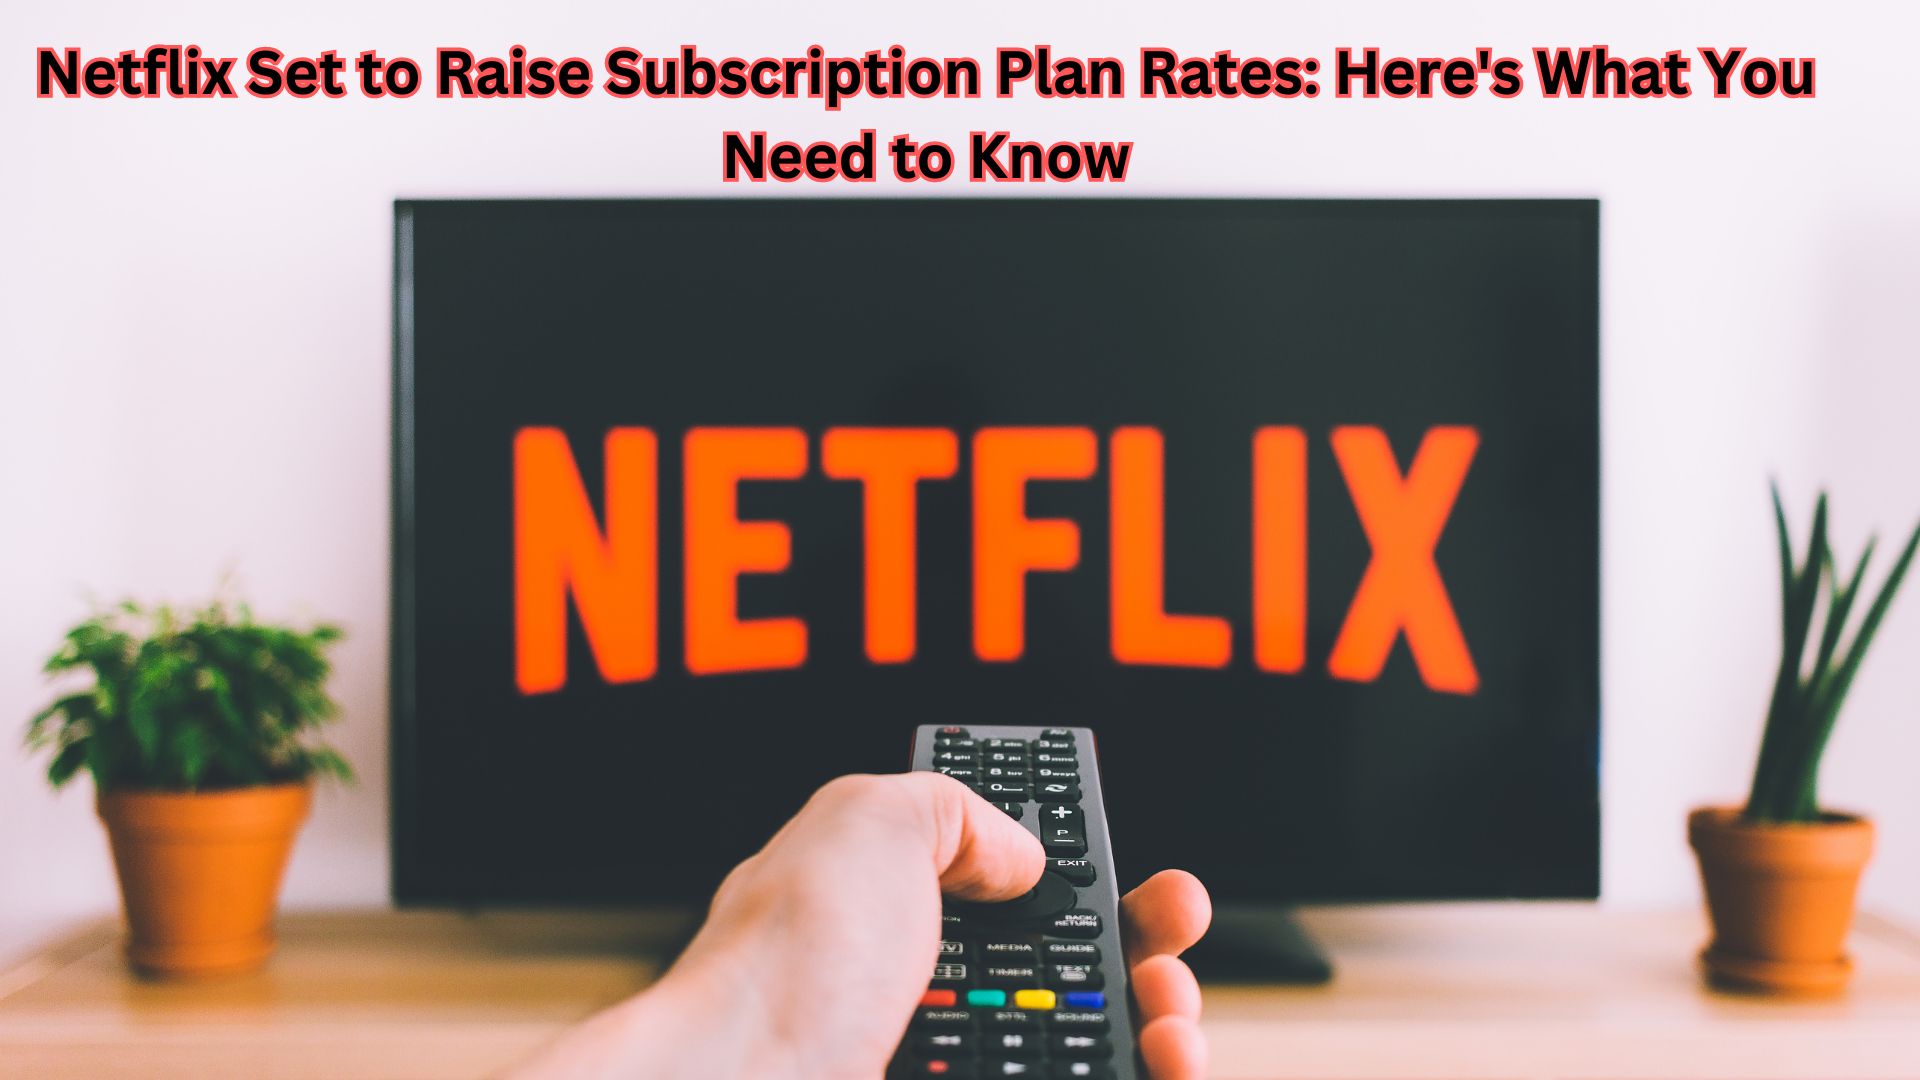 Netflix Set to Raise Subscription Plan Rates: Here's What You Need to Know